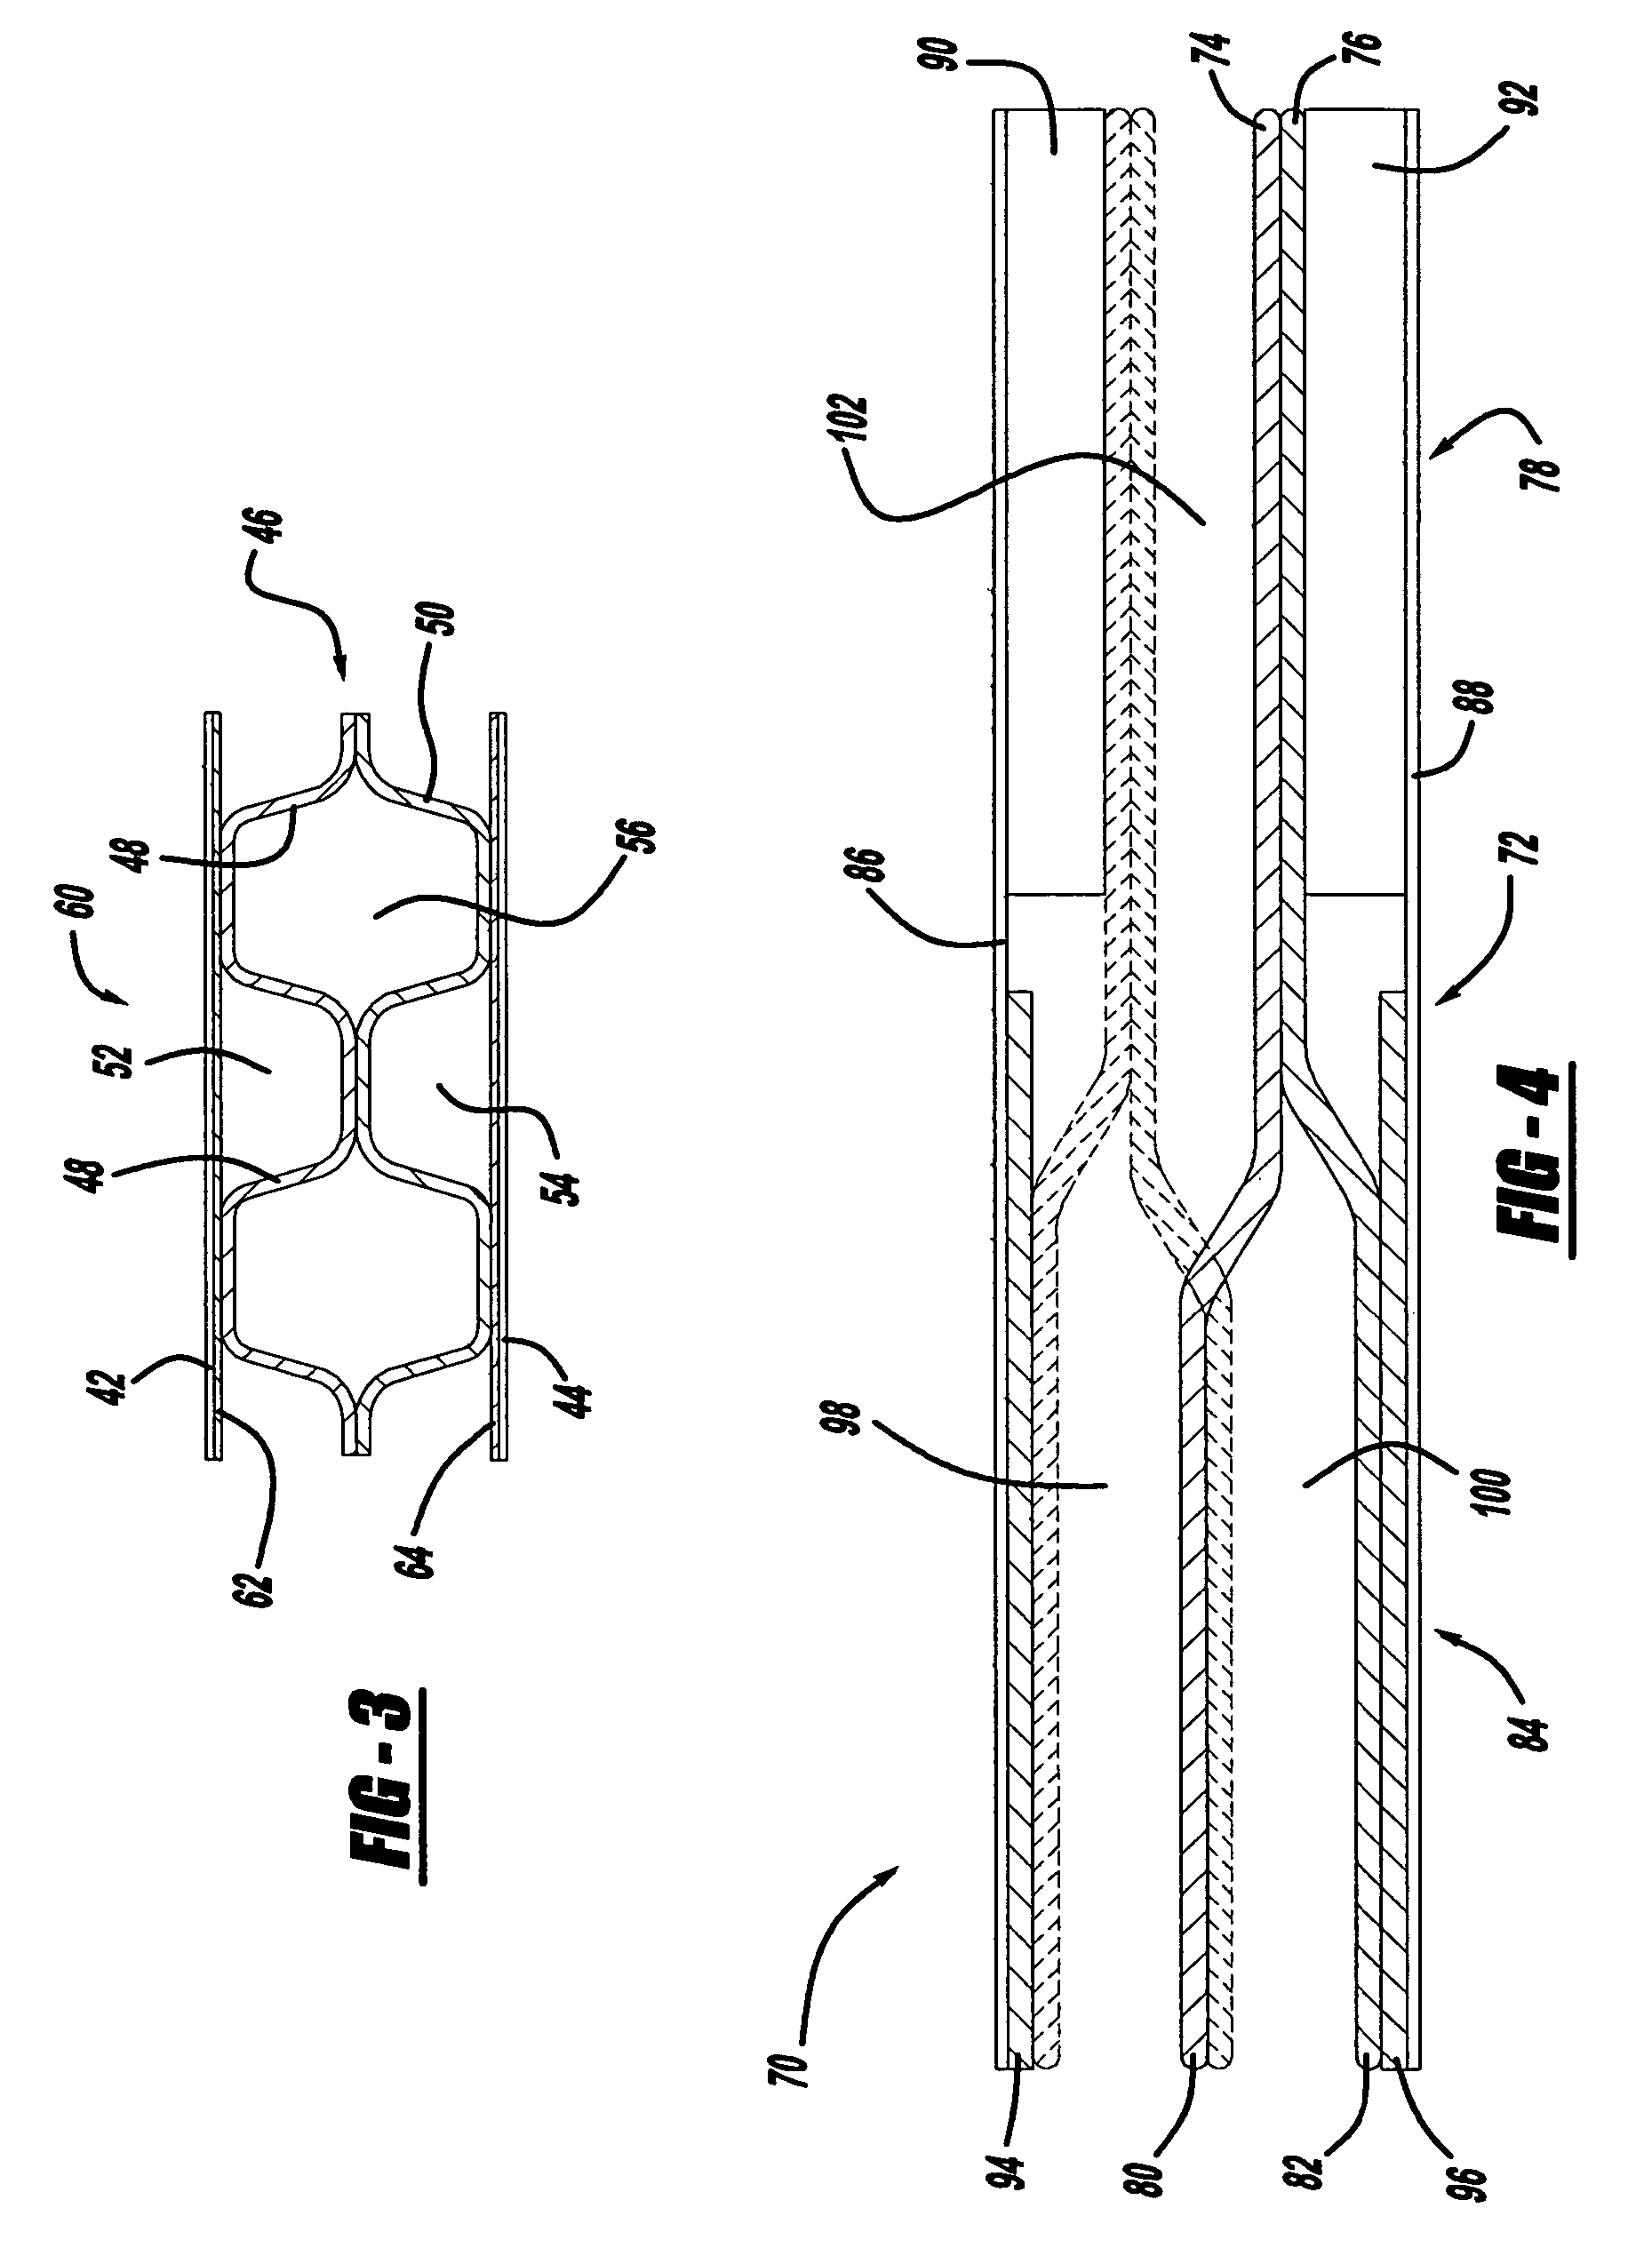 Reactant feed for nested stamped plates for a compact fuel cell